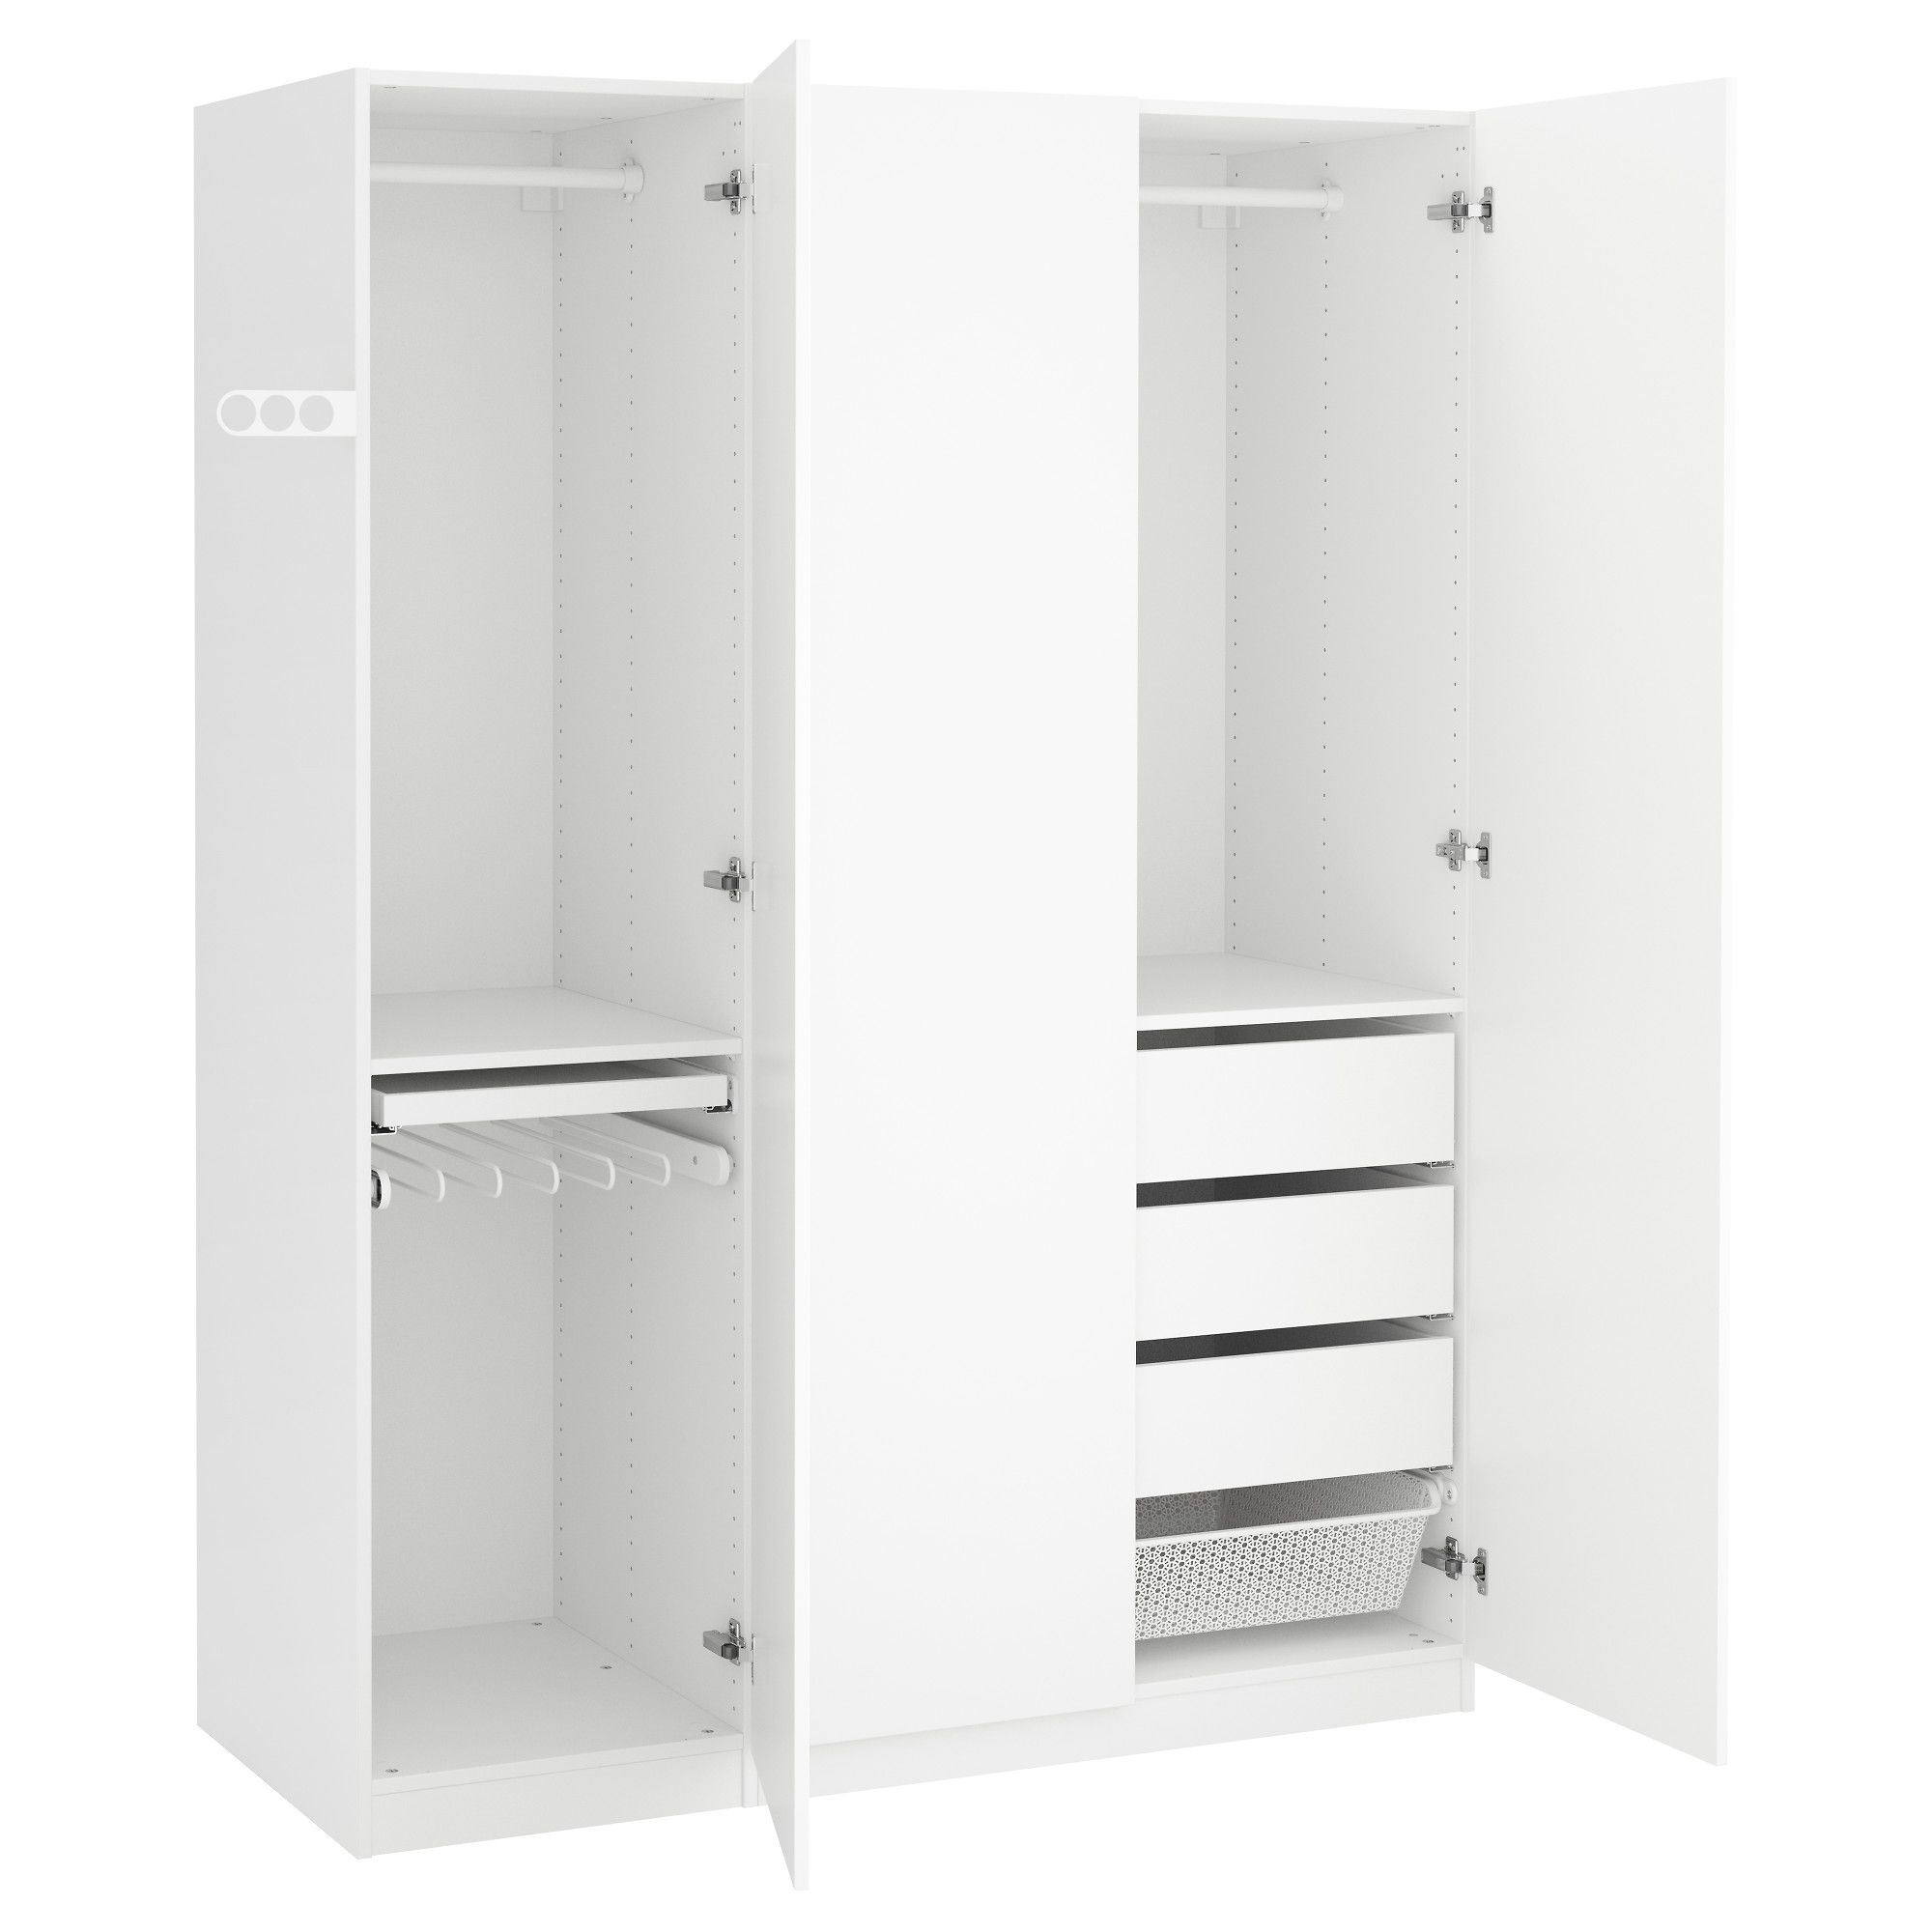 Single Wardrobe Doors Door Designs White With Shelves Mirror Within Well Liked Single White Wardrobes With Drawers (View 10 of 15)